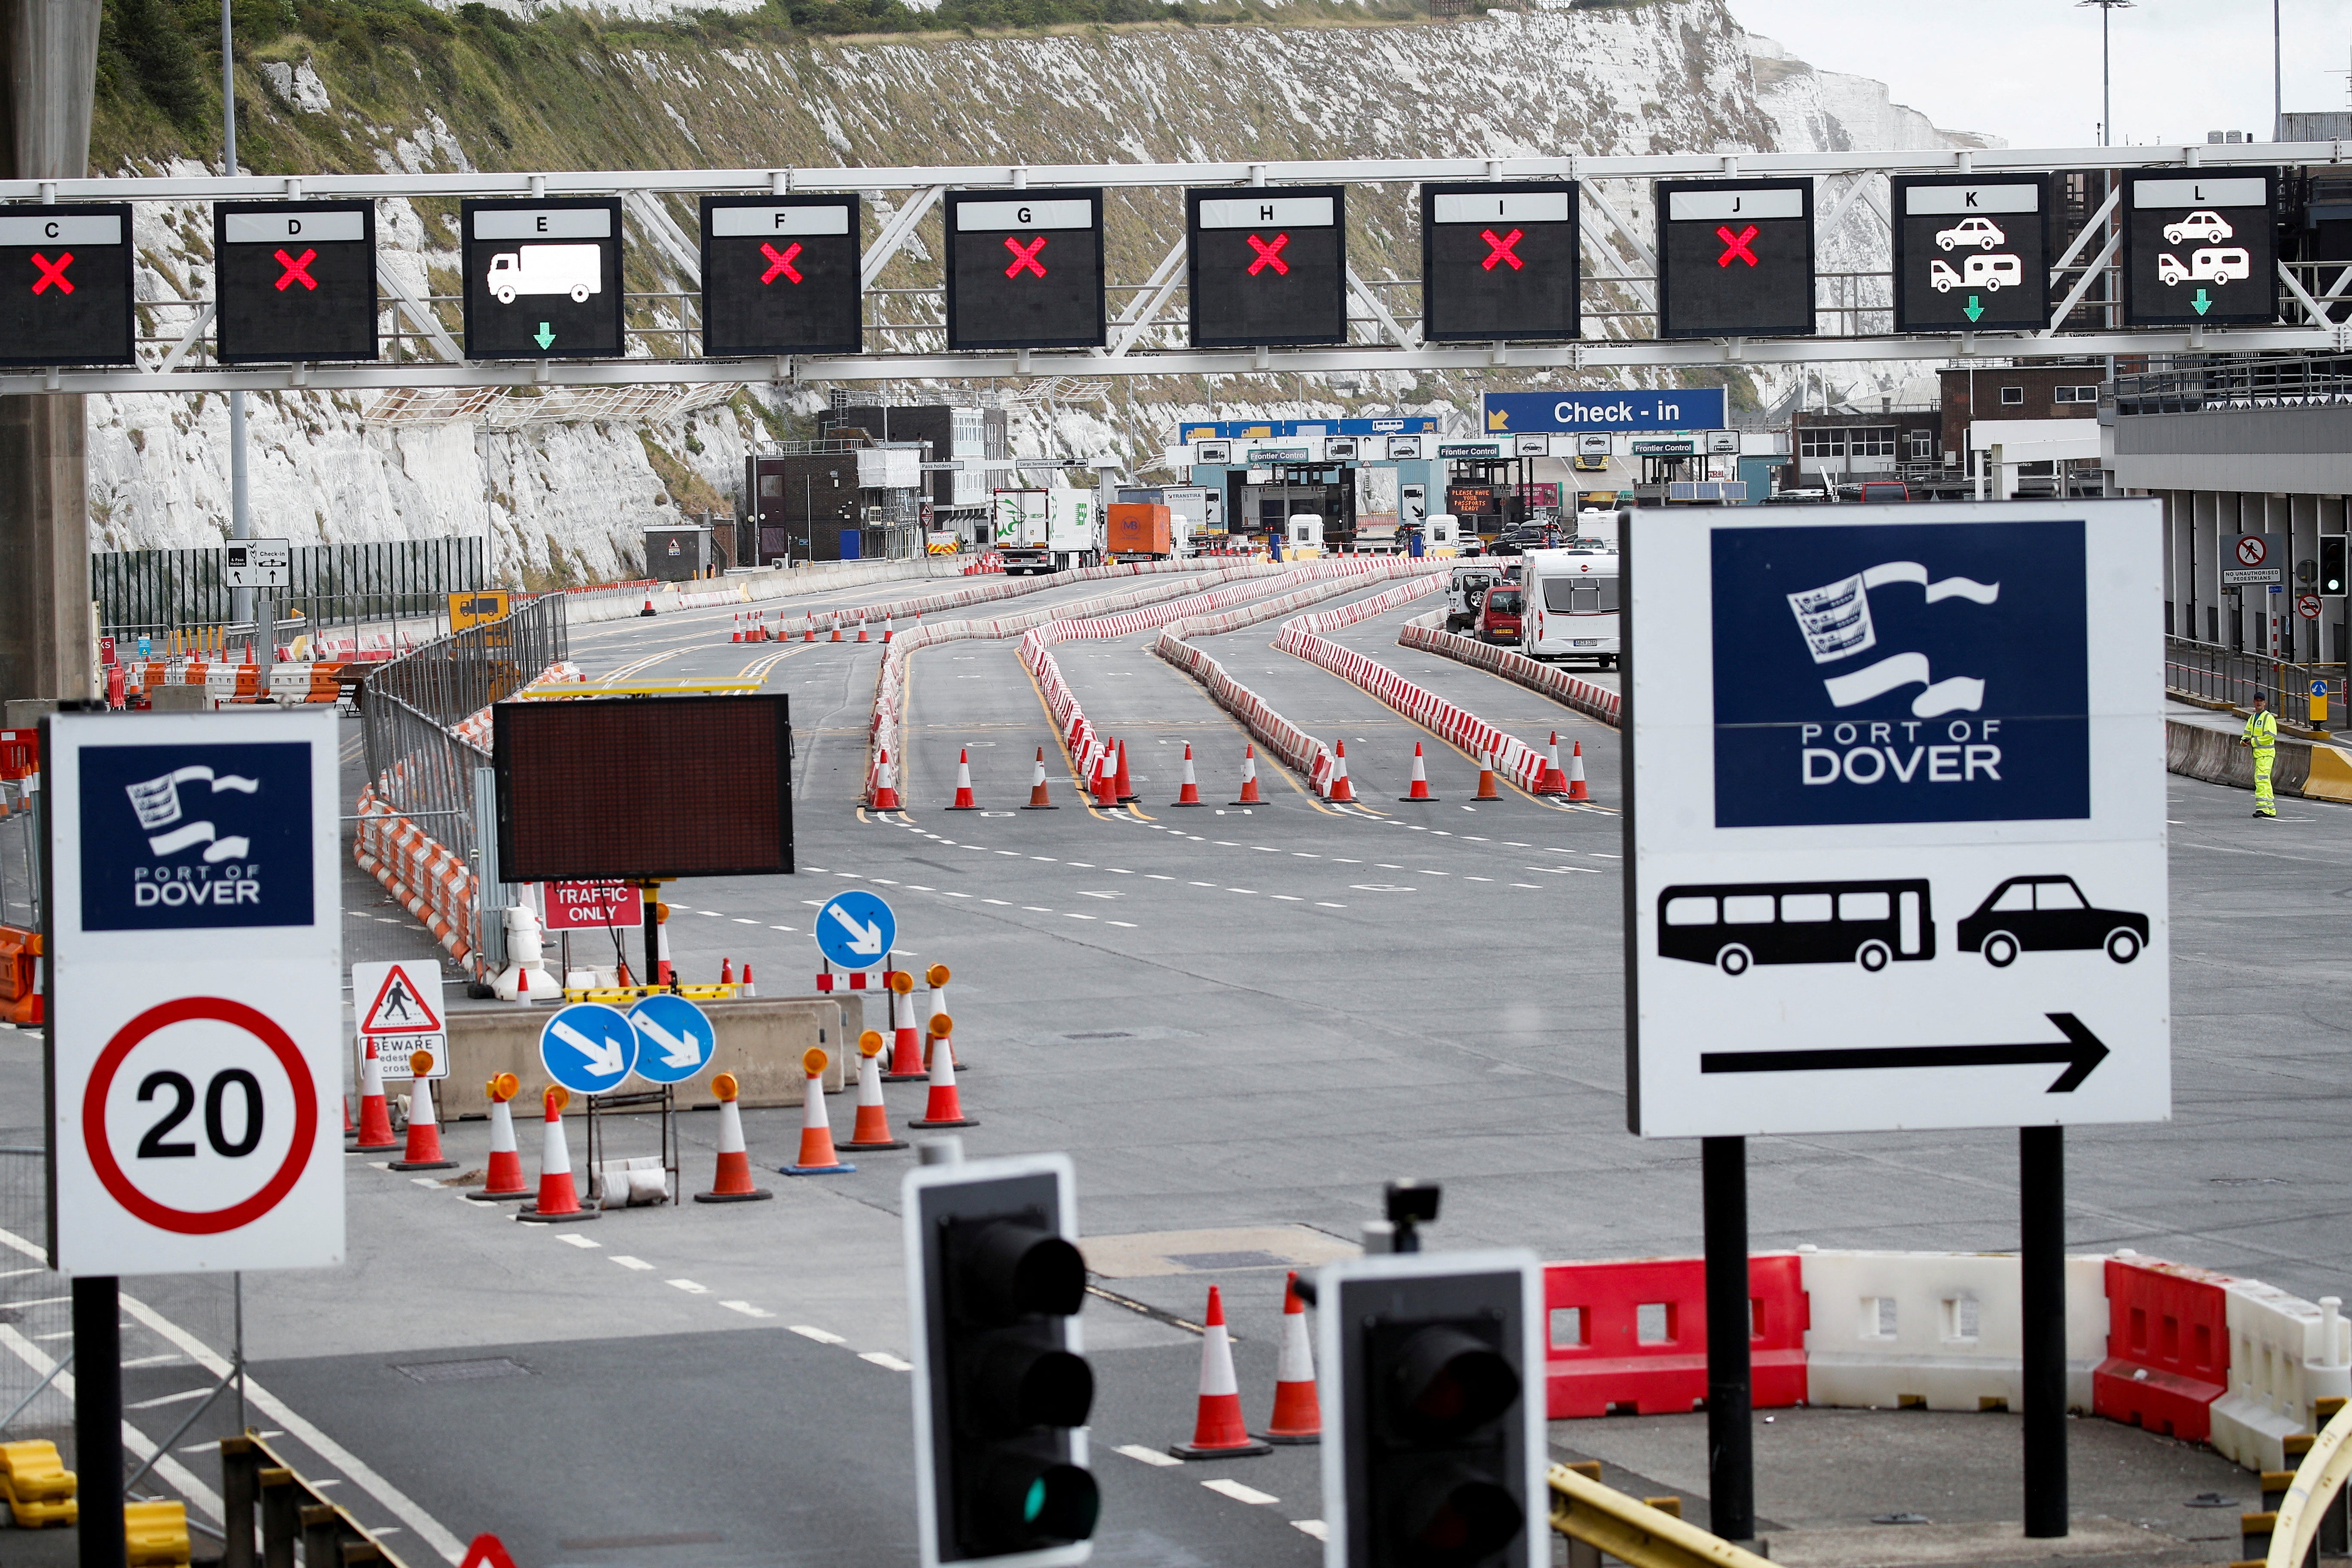 Post-Brexit checks and paperwork have added to disruption at the Port of Dover